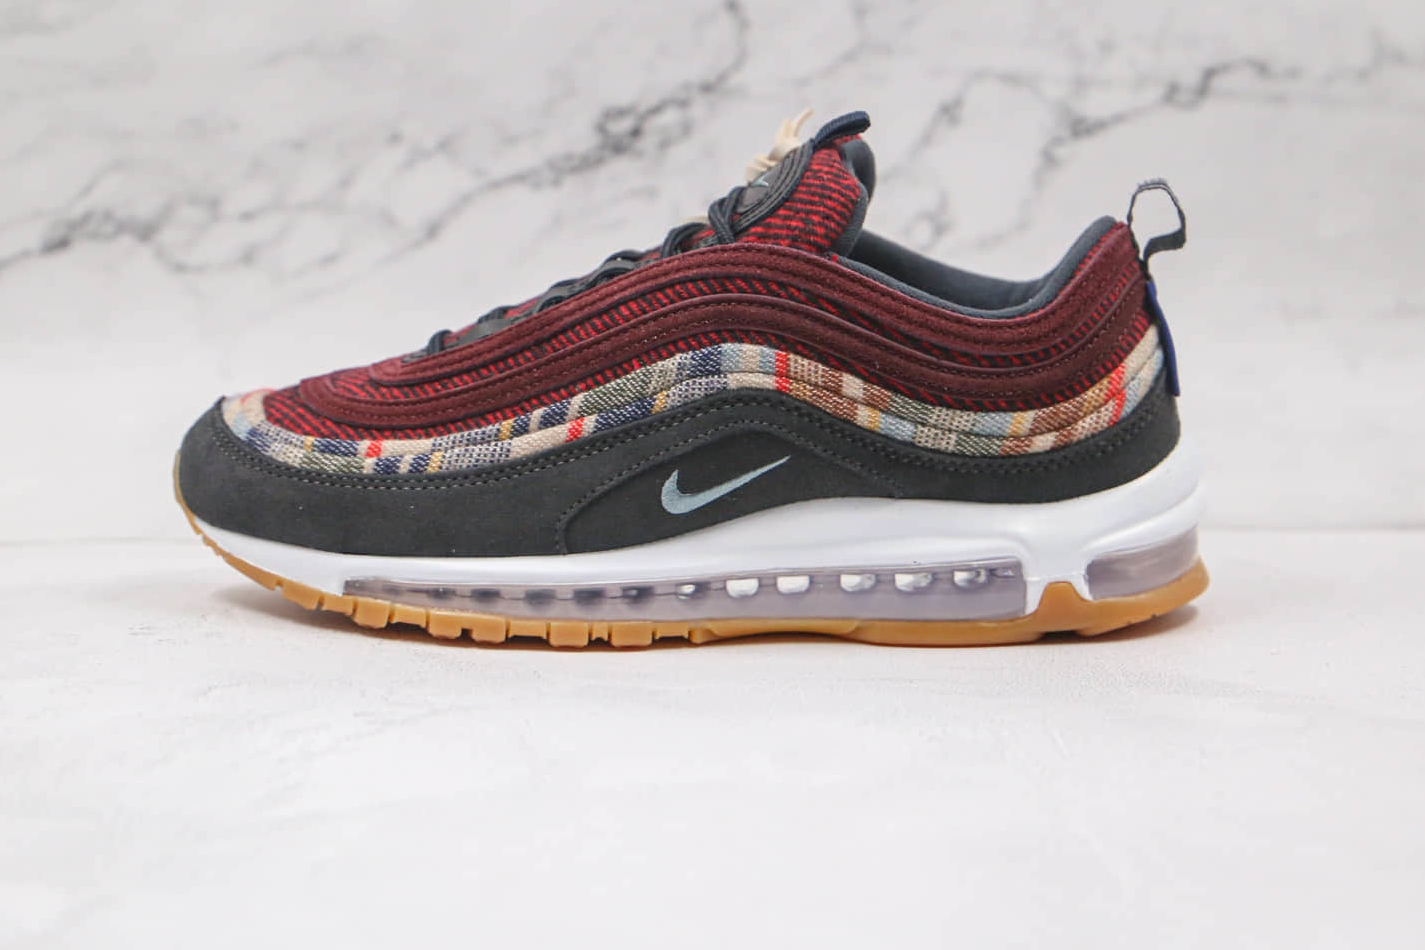 Nike Air Max 97 Pendleton By You Wine Red Black Olive - Limited Edition Shoes for Unmatched Style